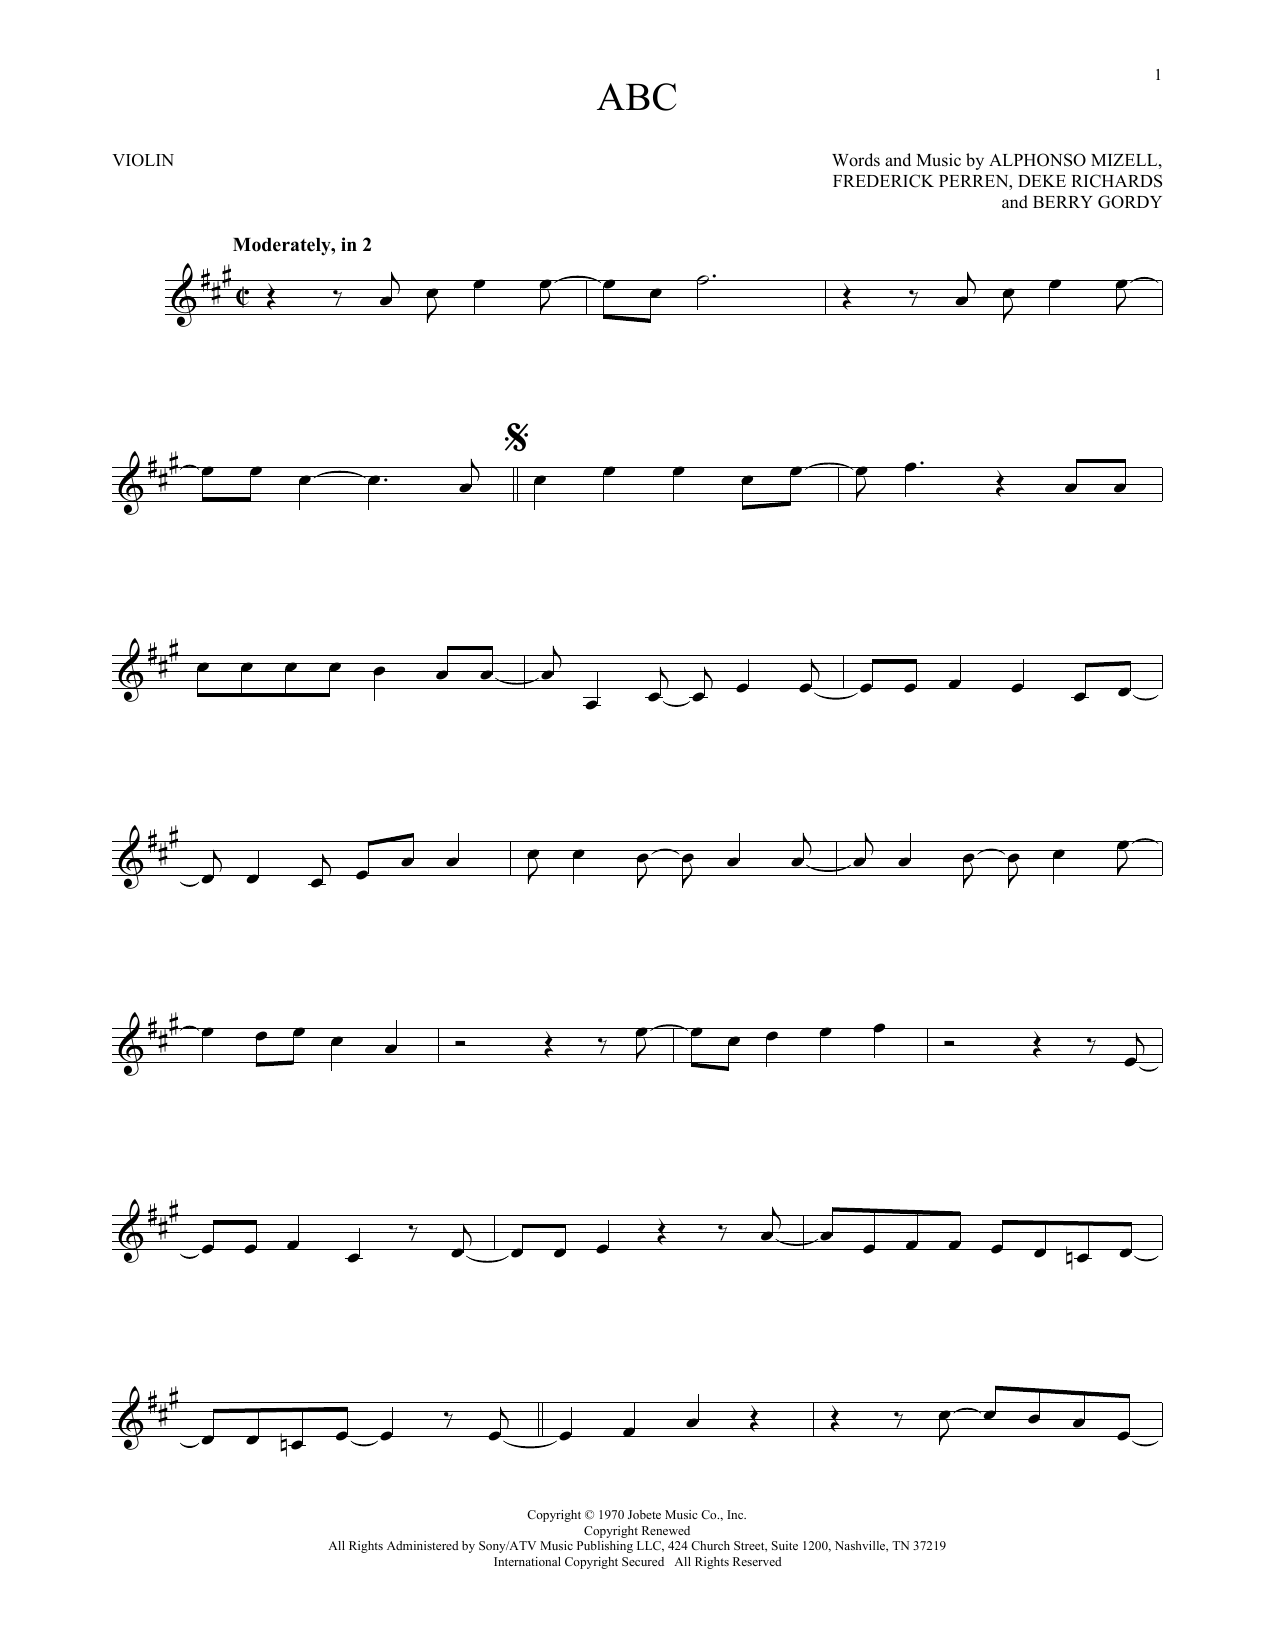 Download The Jackson 5 ABC Sheet Music